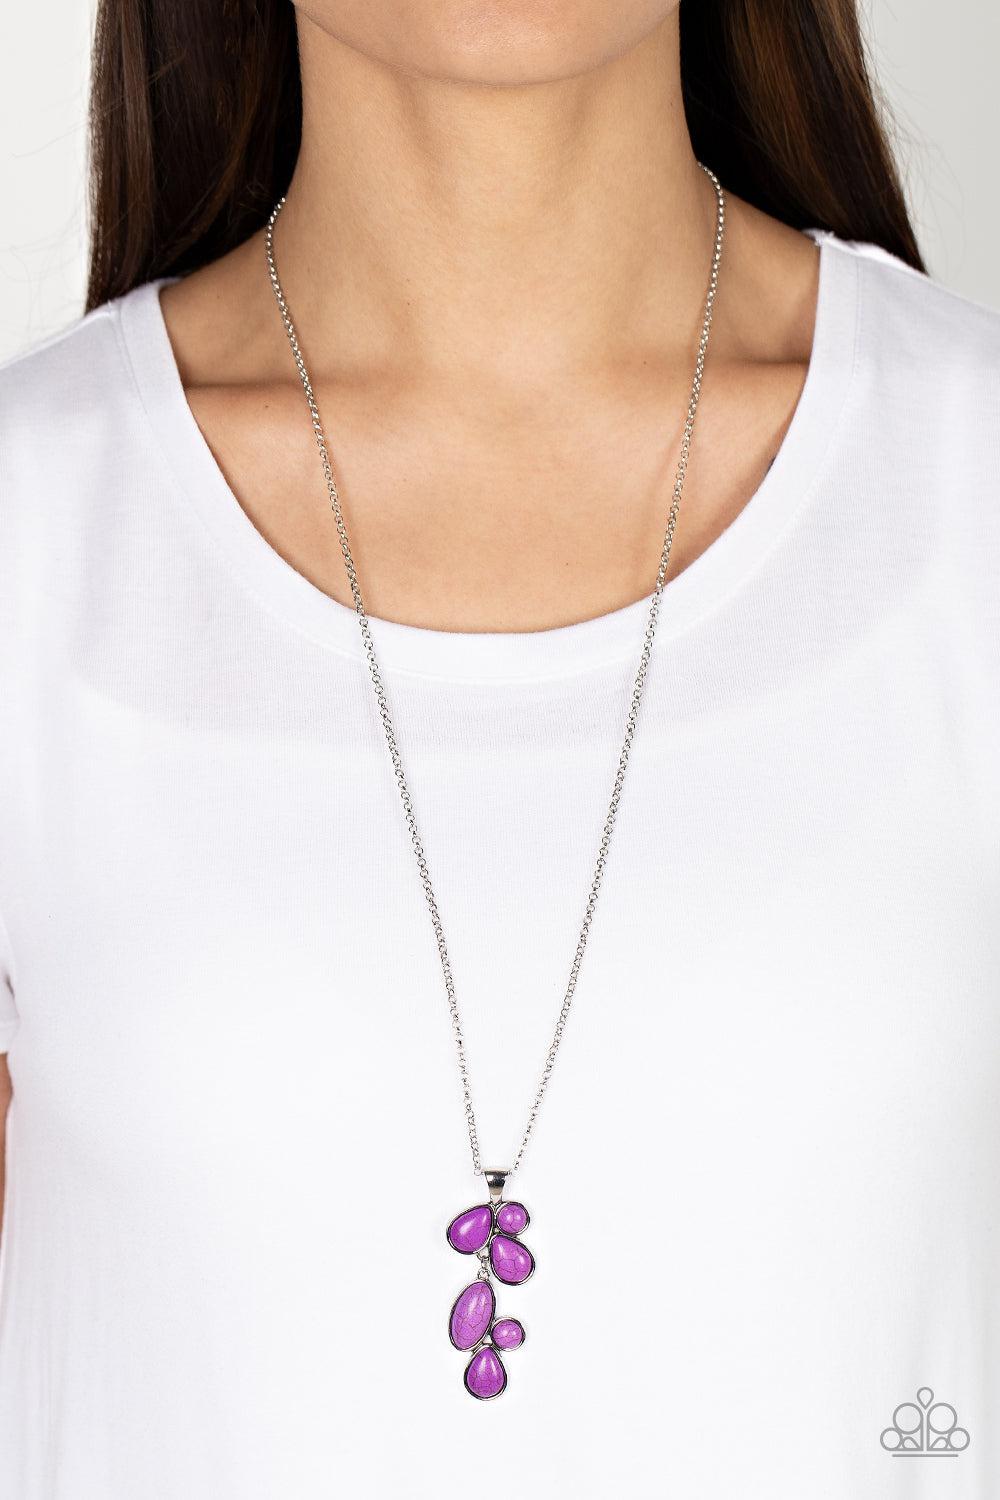 Wild Bunch Flair Purple Stone Necklace - Paparazzi Accessories-on model - CarasShop.com - $5 Jewelry by Cara Jewels